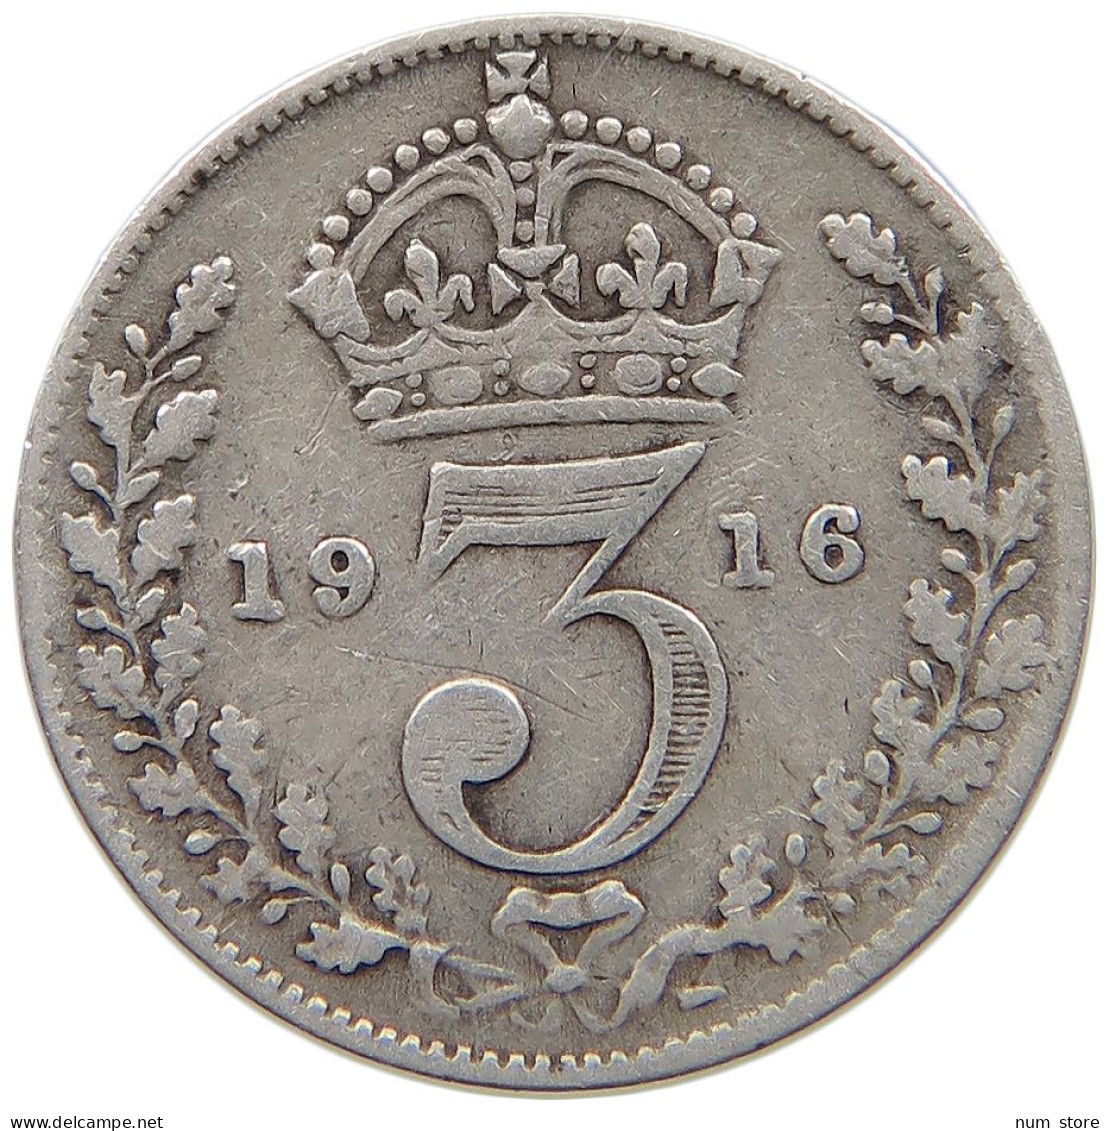 GREAT BRITAIN THREEPENCE 1916 #s059 0619 - F. 3 Pence